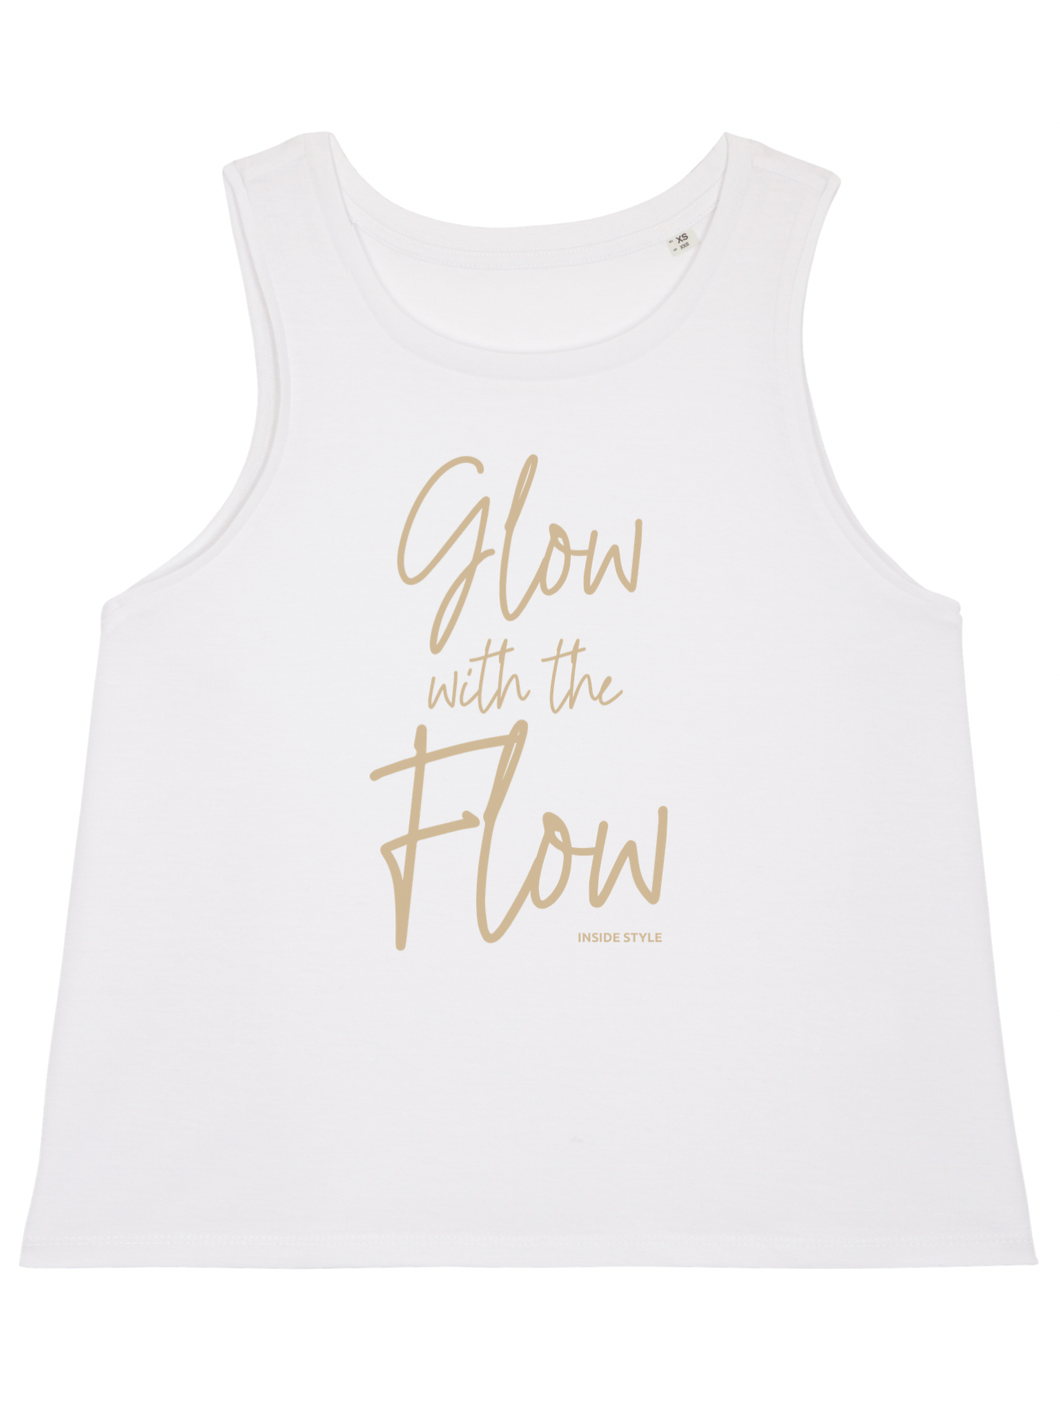 Wild Thing - Glow with the Flow - Beige/Kupfer